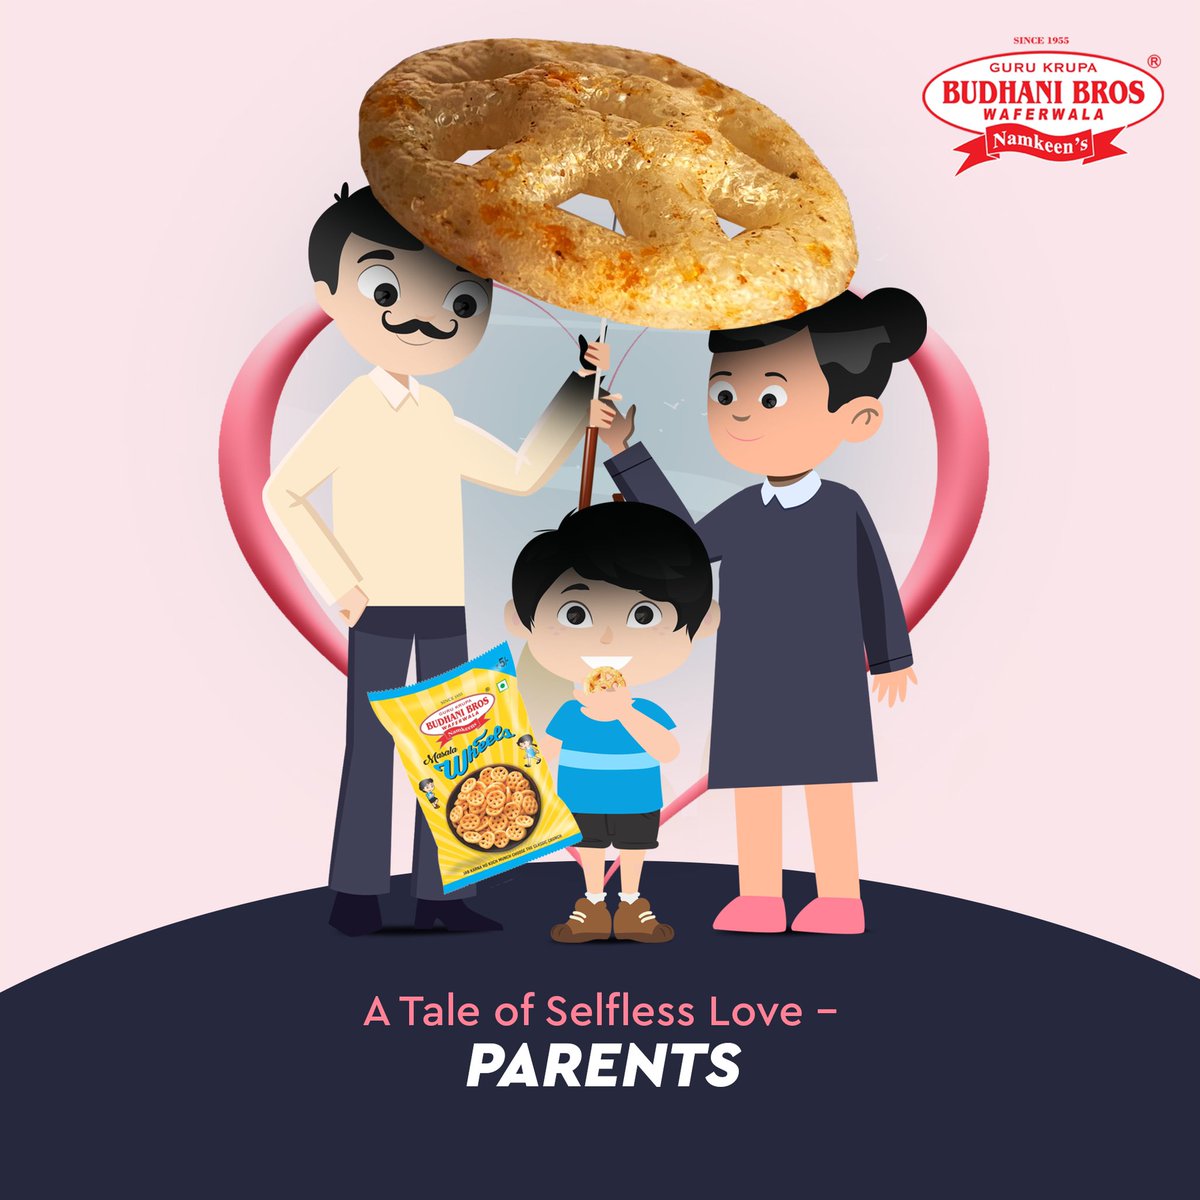 It is Slow Down Time,
Let Me Have this Moment Forever👨‍👩‍👦

#parentsday #globalparentsday #parentsdayout #worldparentsday #parents #wafers #kids #wafersbrand #chips #thursday #june #weekend #almostweekend #pune #budhanibobby #budhanibroswaferwala #india